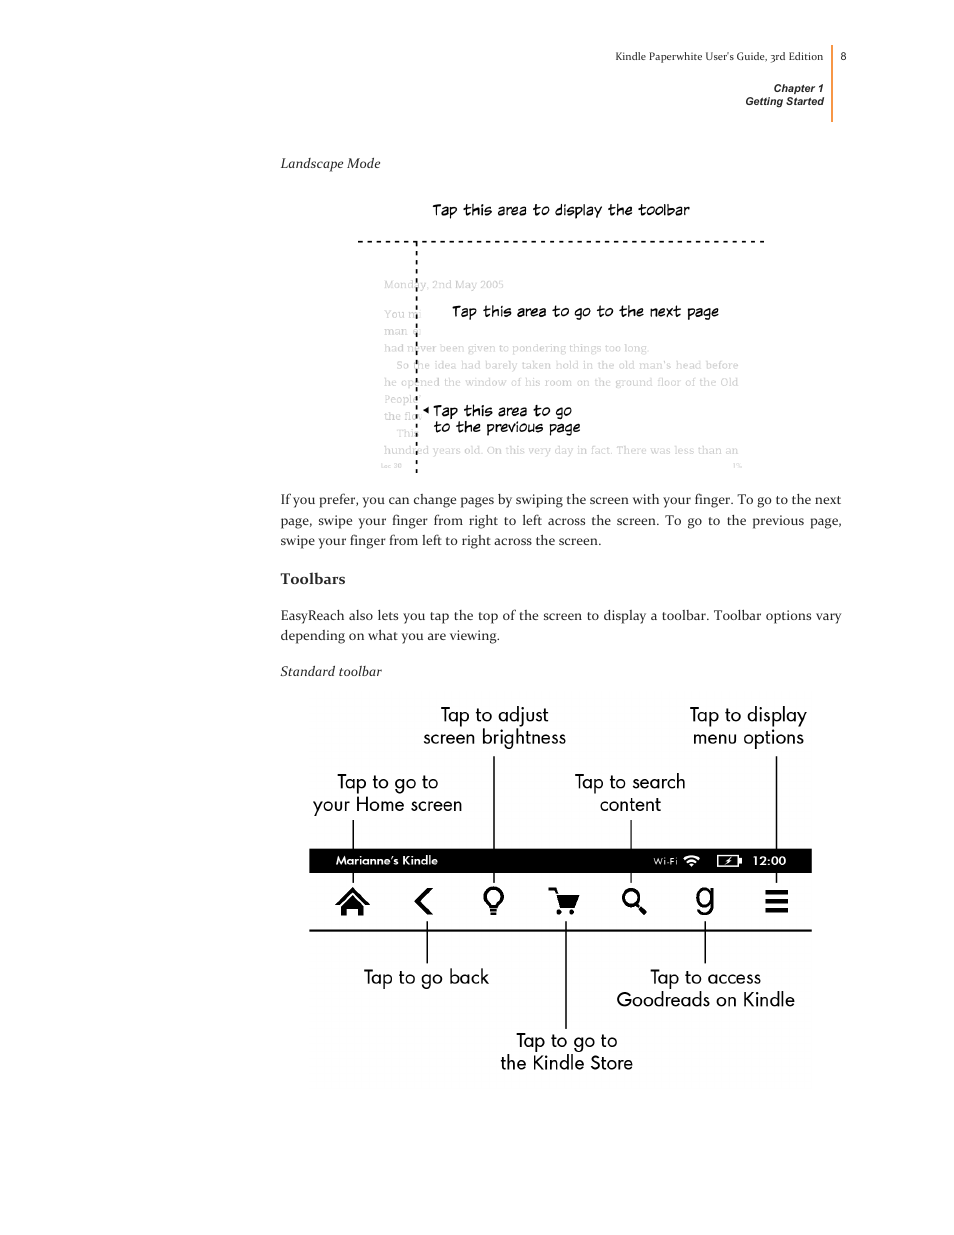 Toolbars | Kindle Paperwhite (2nd Generation) User Manual | Page 8 / 47